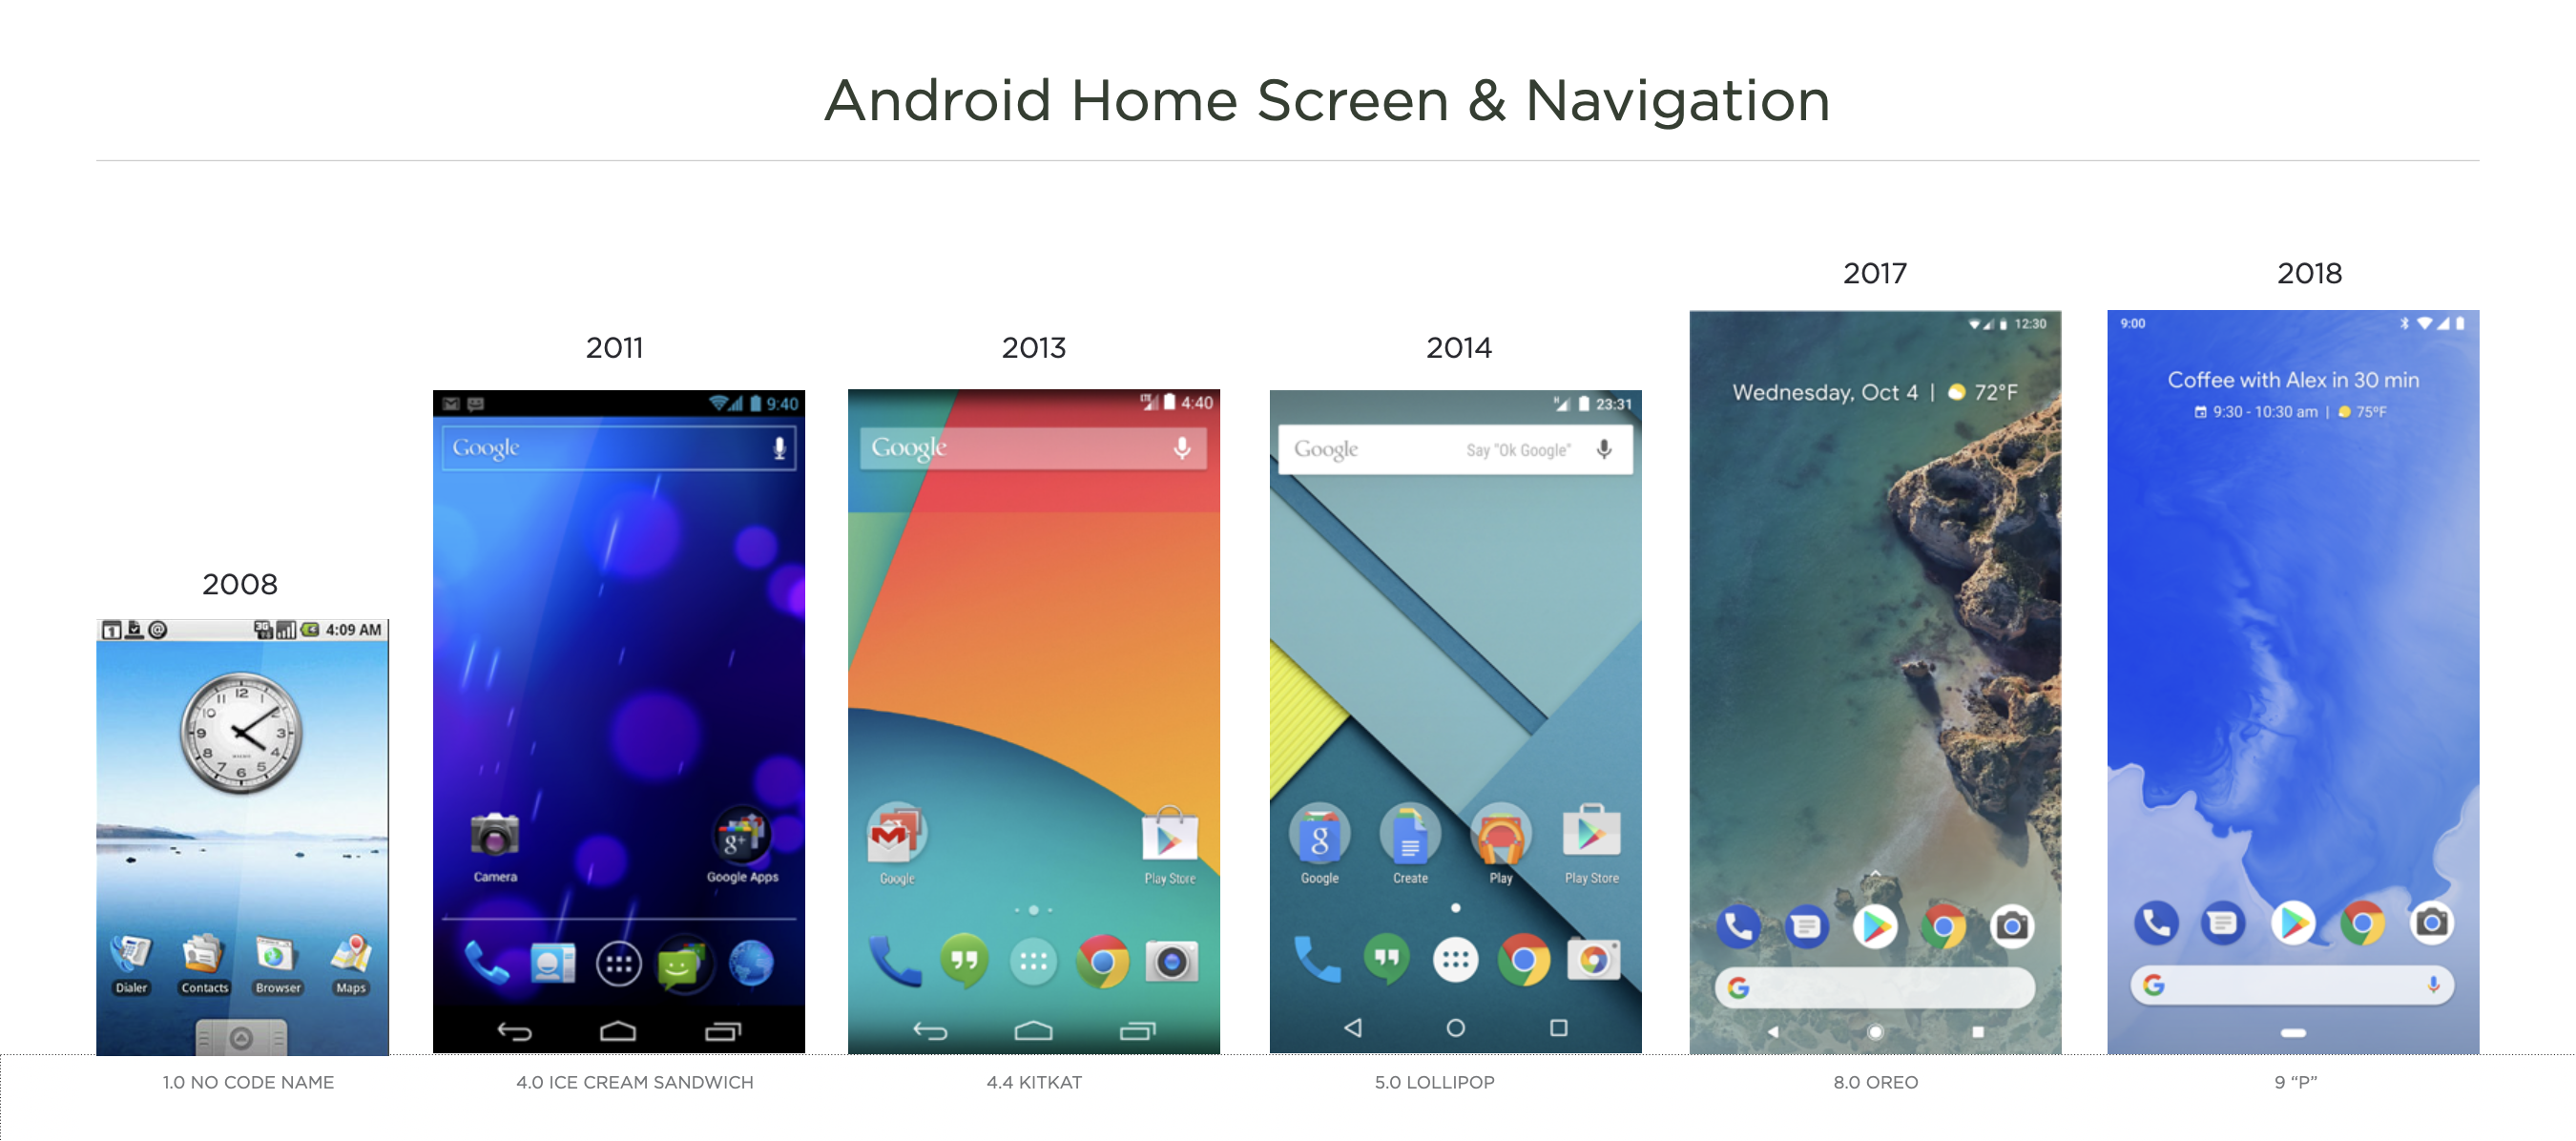 Design is never done: the Android home edition